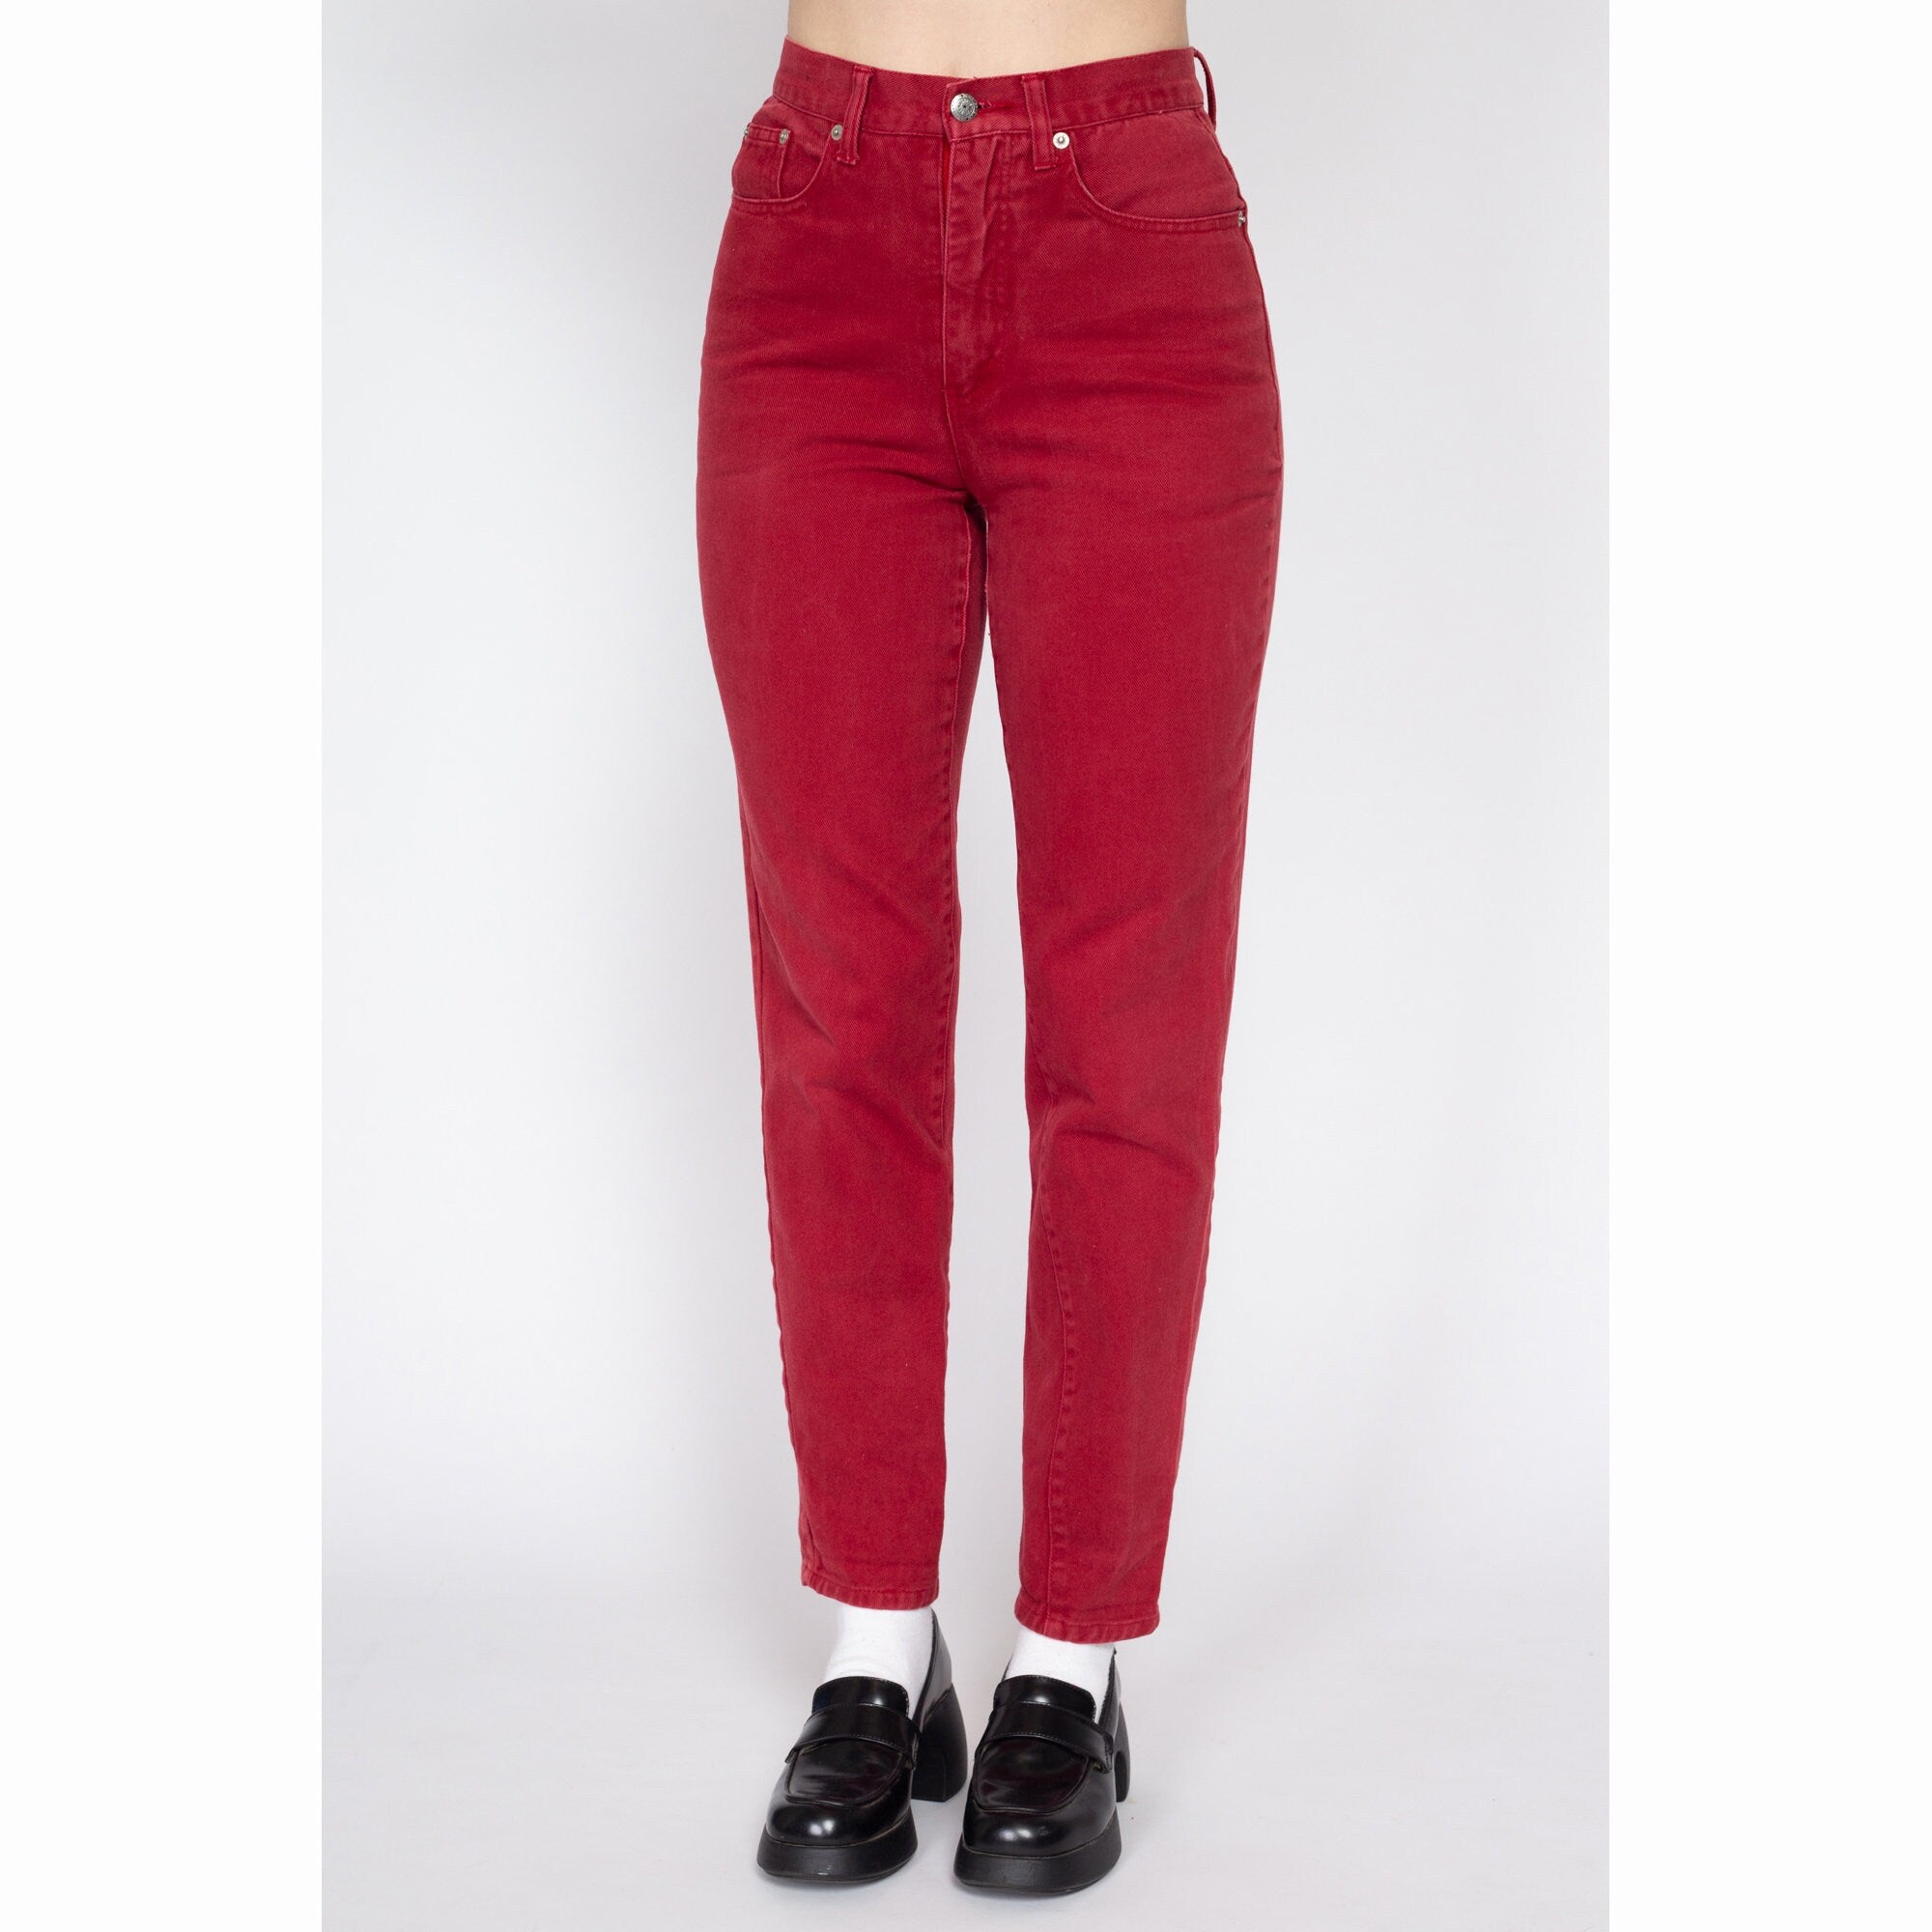 Korean Fashion Candy Colored Skinny Jeans For Women Slim Denim Jeans Pants  For Women In Black, White, Pink, Yellow, Red, Khaki, And Green 210809 From  Bai05, $16.72 | DHgate.Com